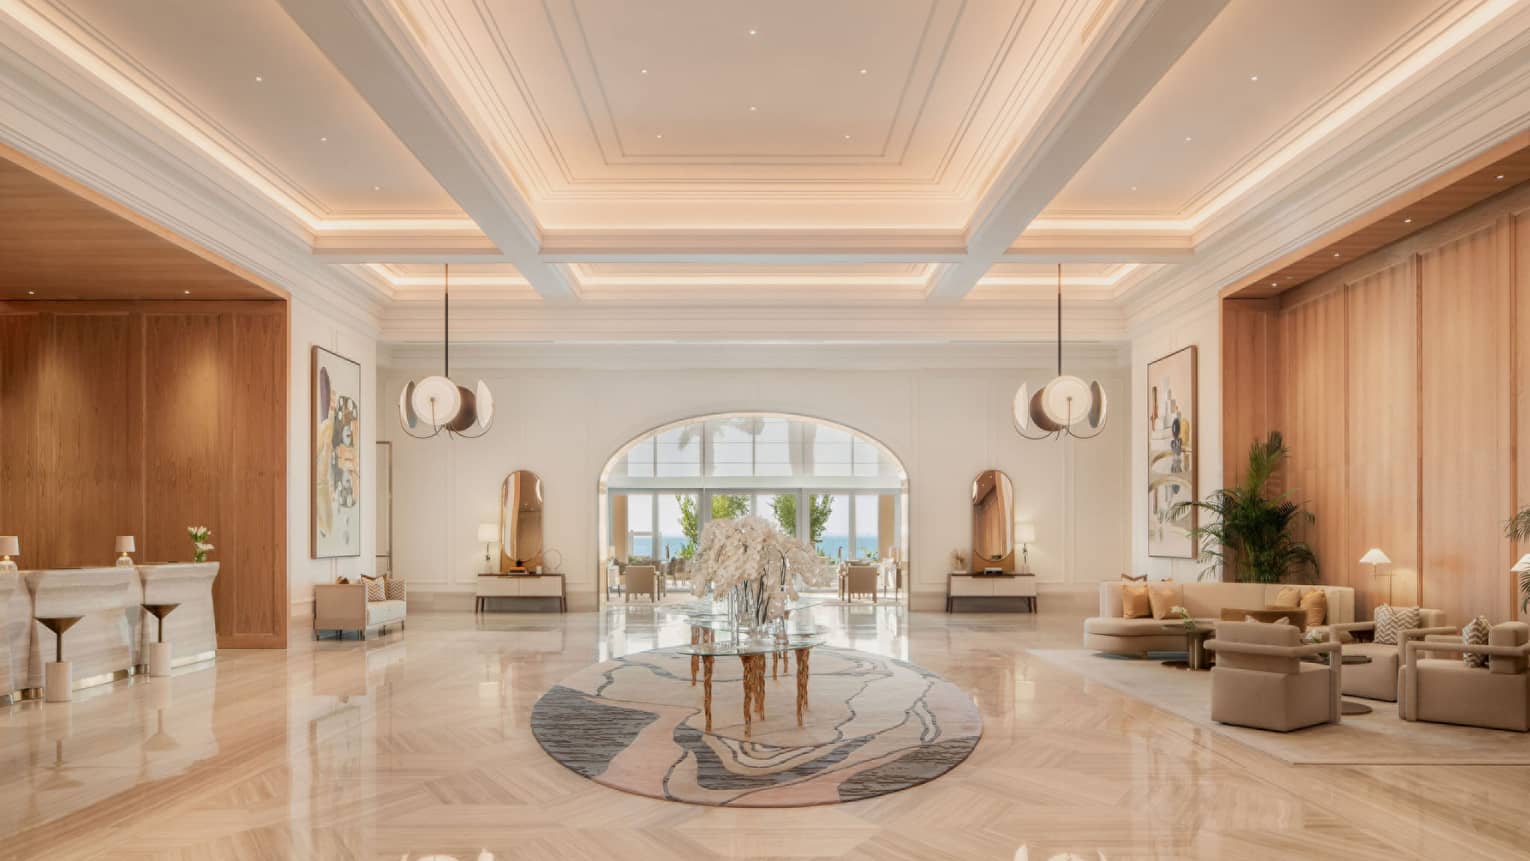 Elegant lobby with marble floors and large floral centrepiece